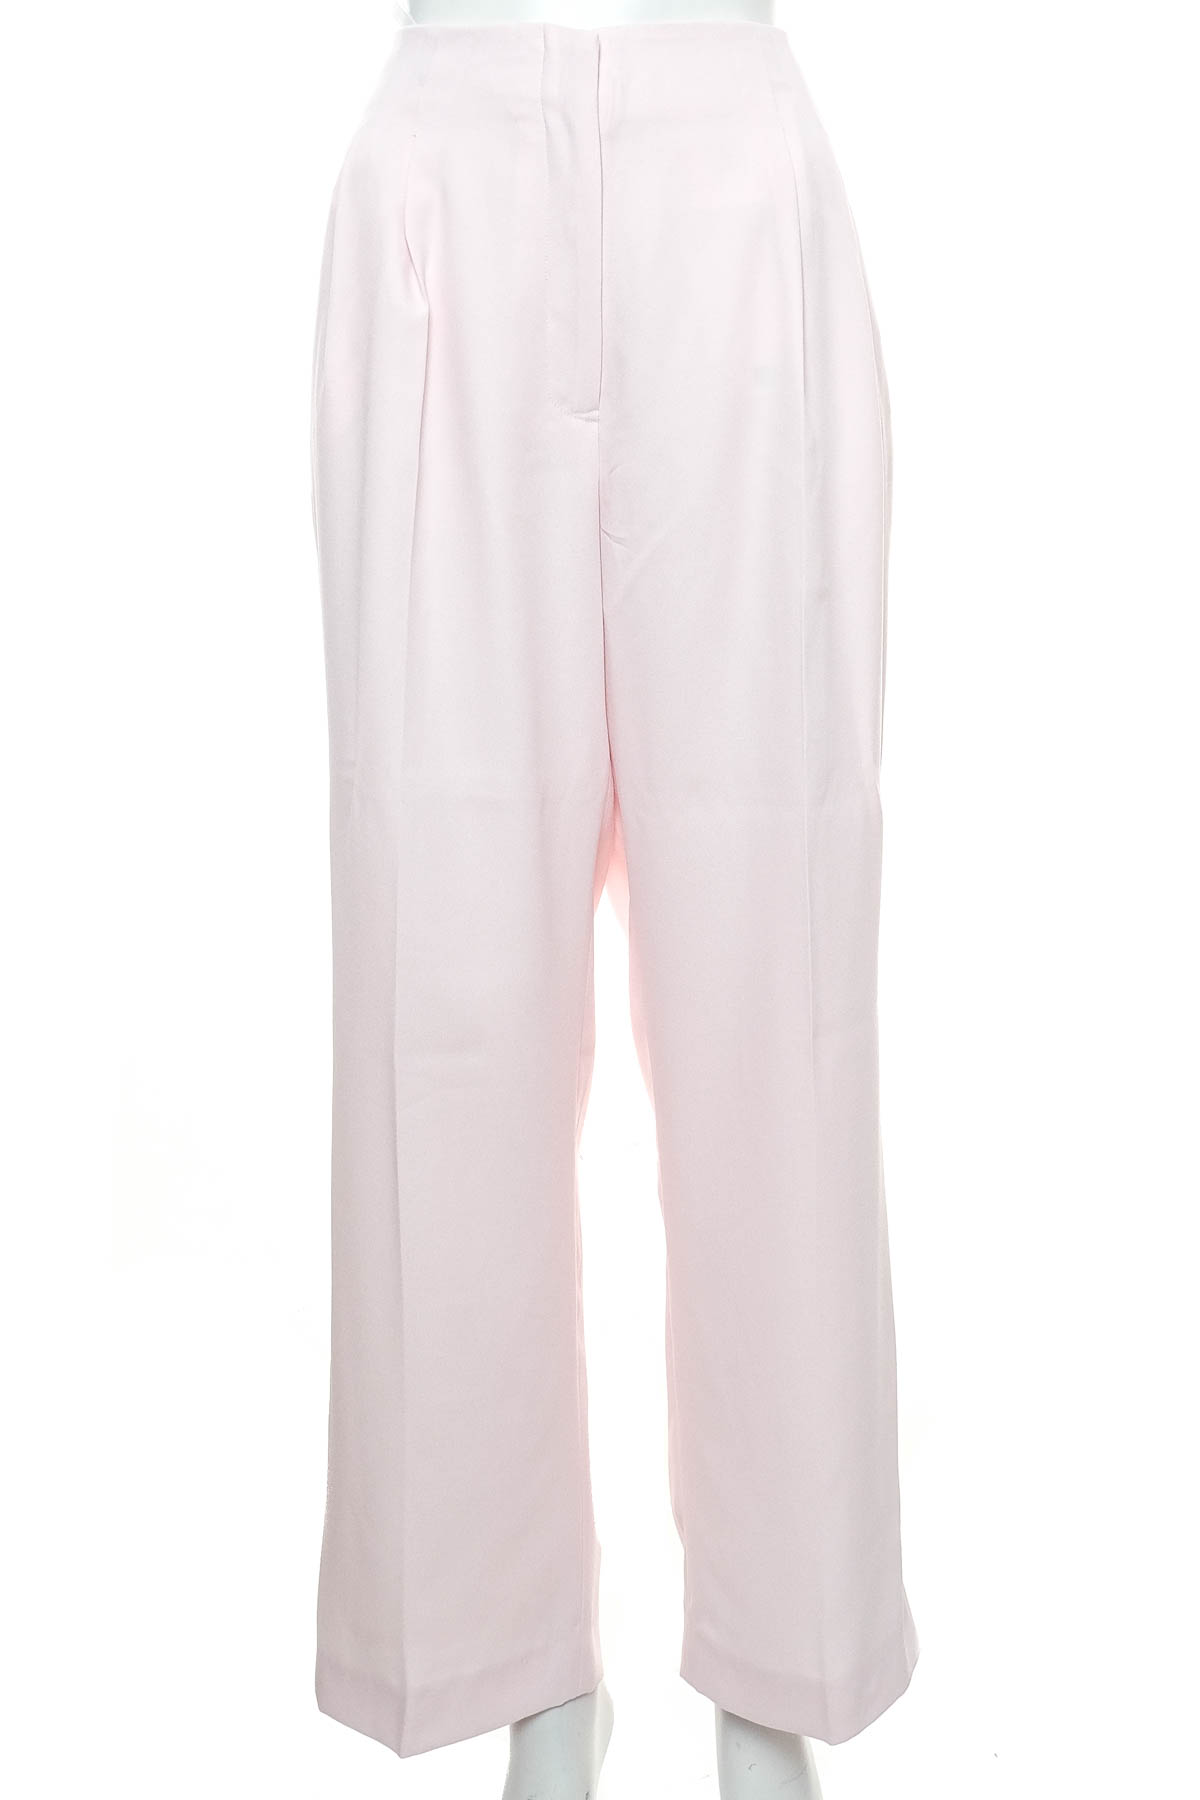 Women's trousers - Together - 0